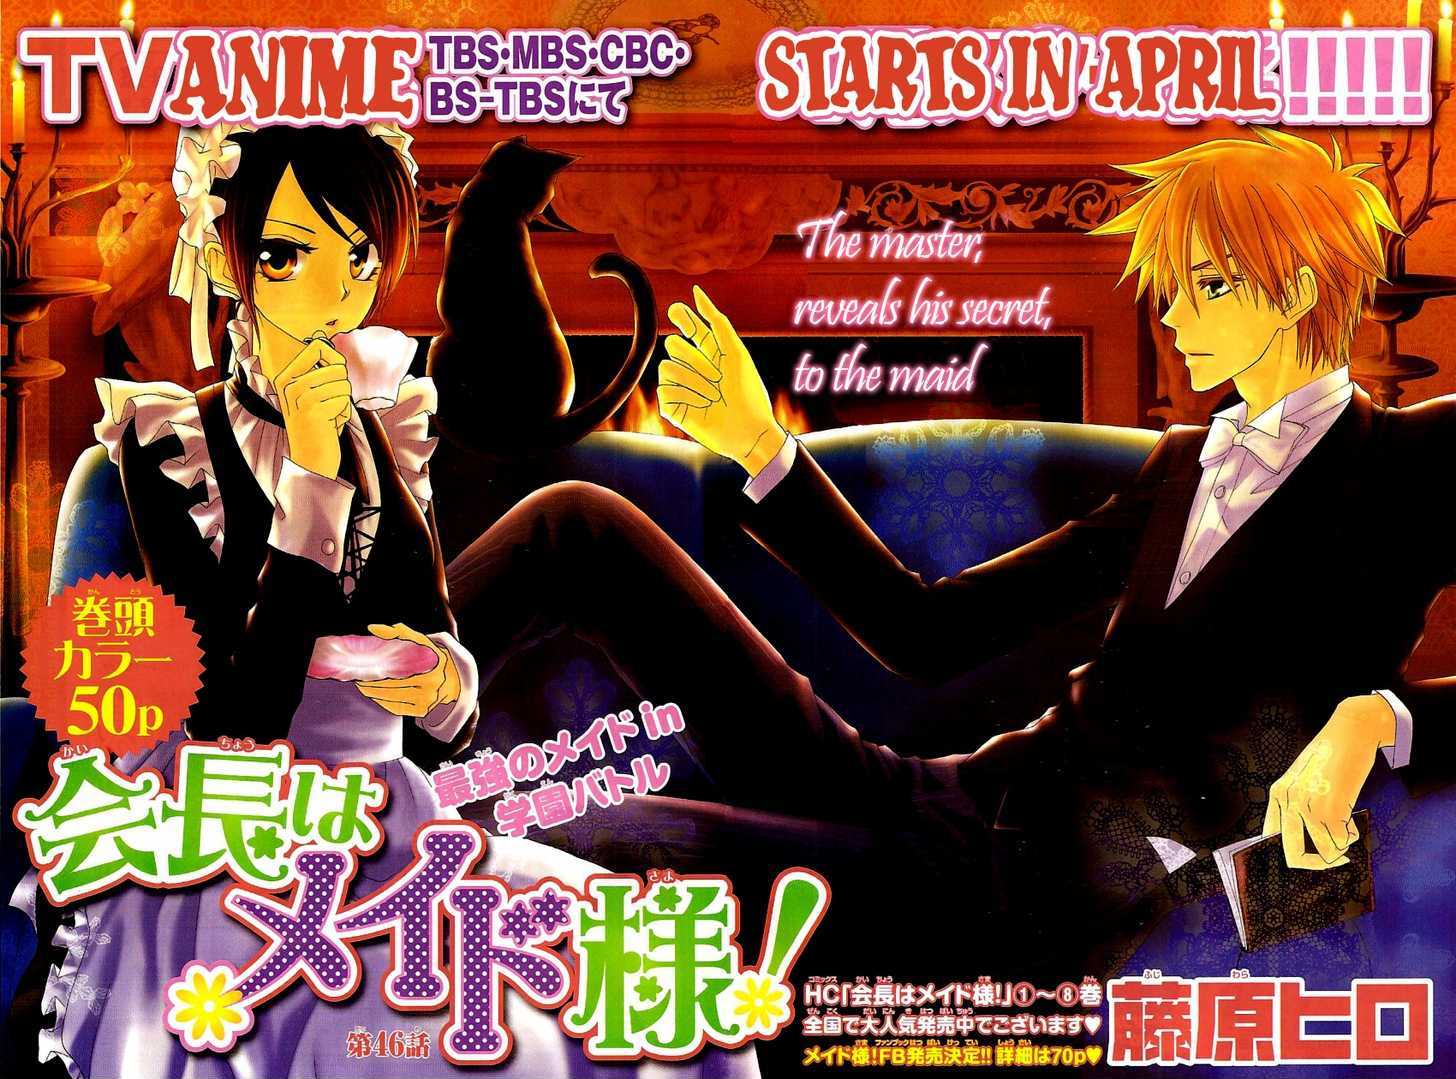 Kaichou Wa Maid-Sama! Vol.11 Chapter 46 : The Master, Reveals His Secret, To The Maid - Picture 2